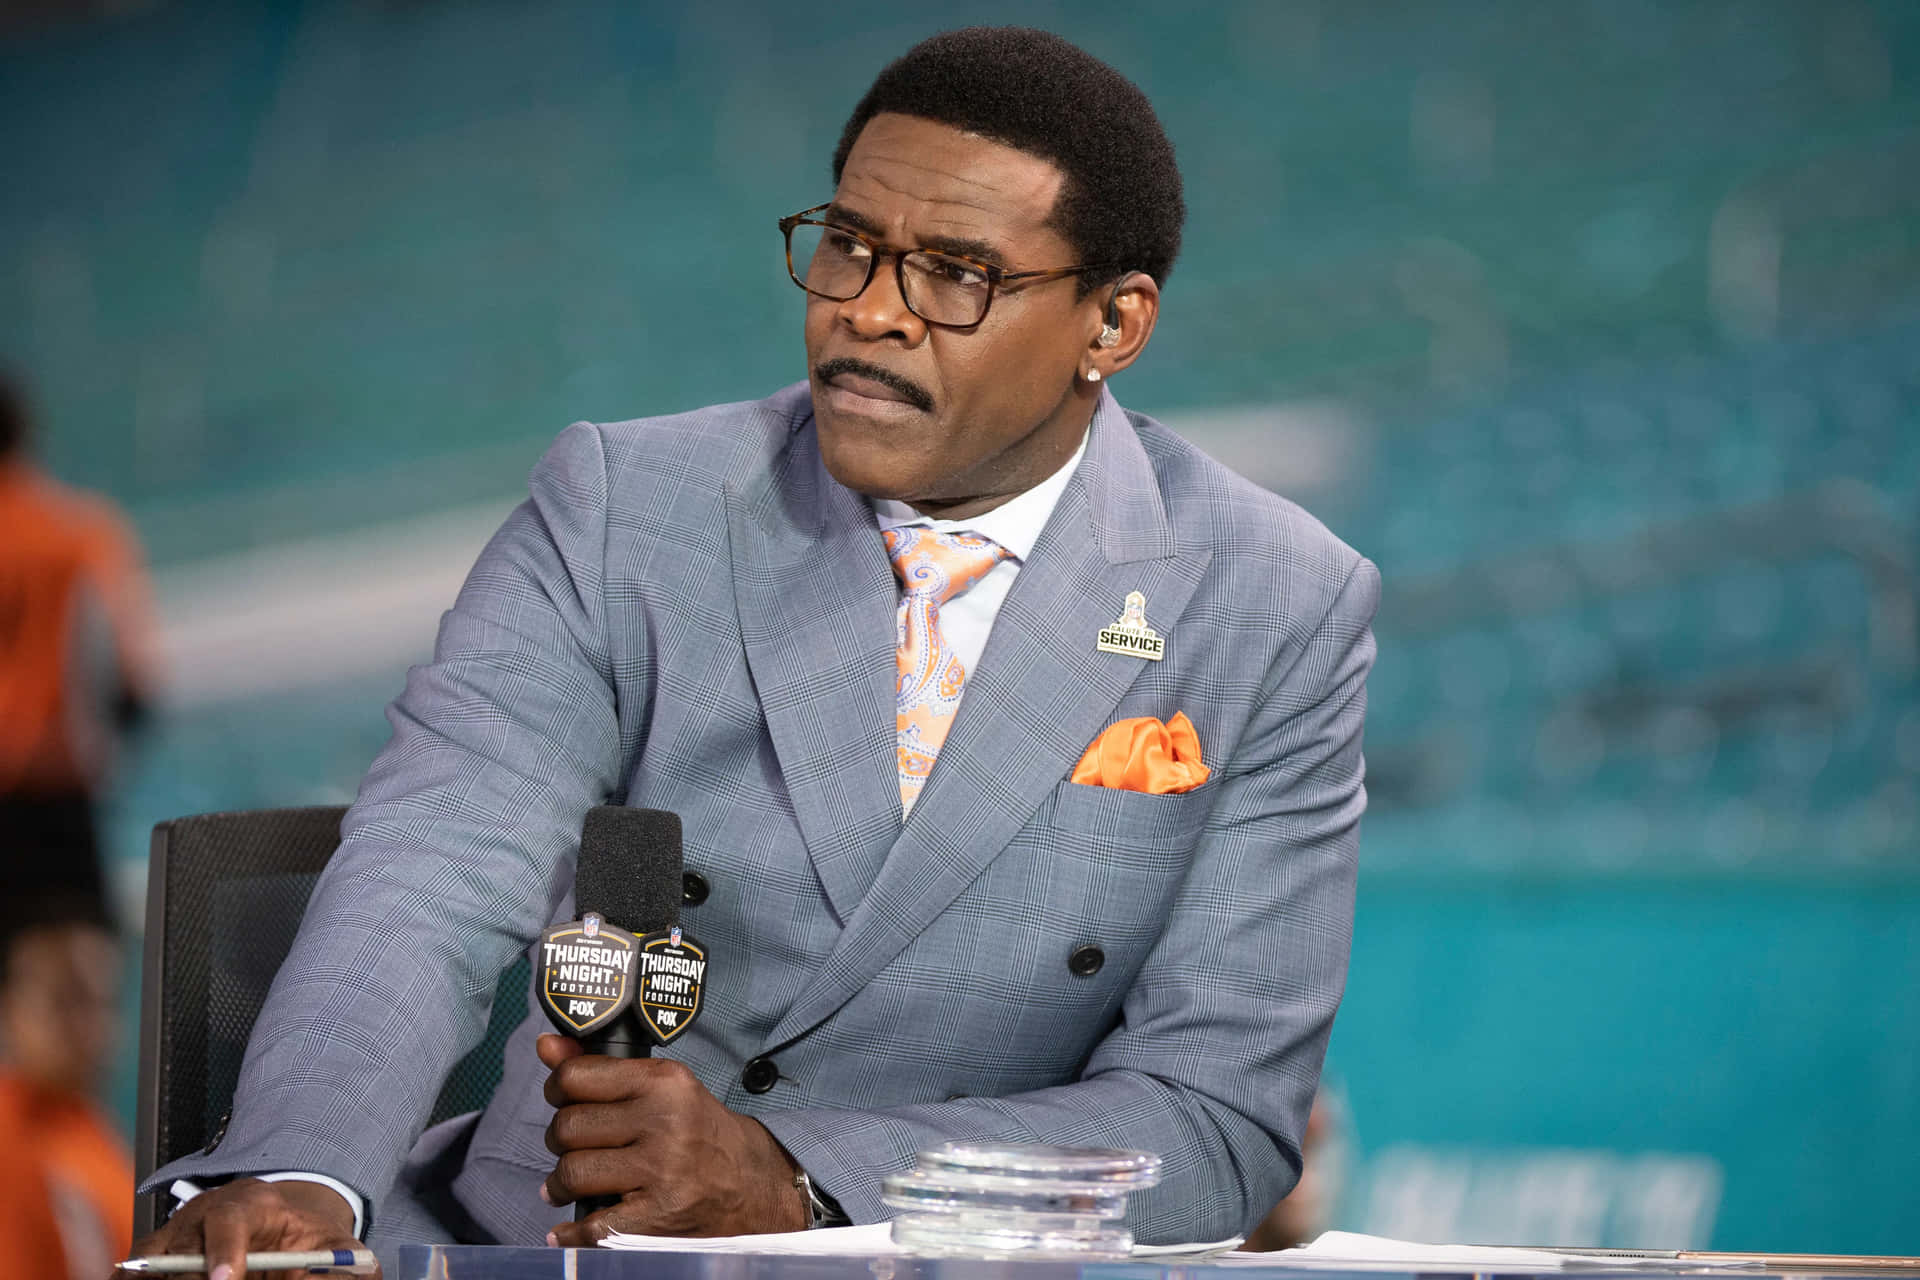 Michaelirvin Is Widely Regarded As One Of The Greatest Wide Receivers In Nfl History. Fondo de pantalla